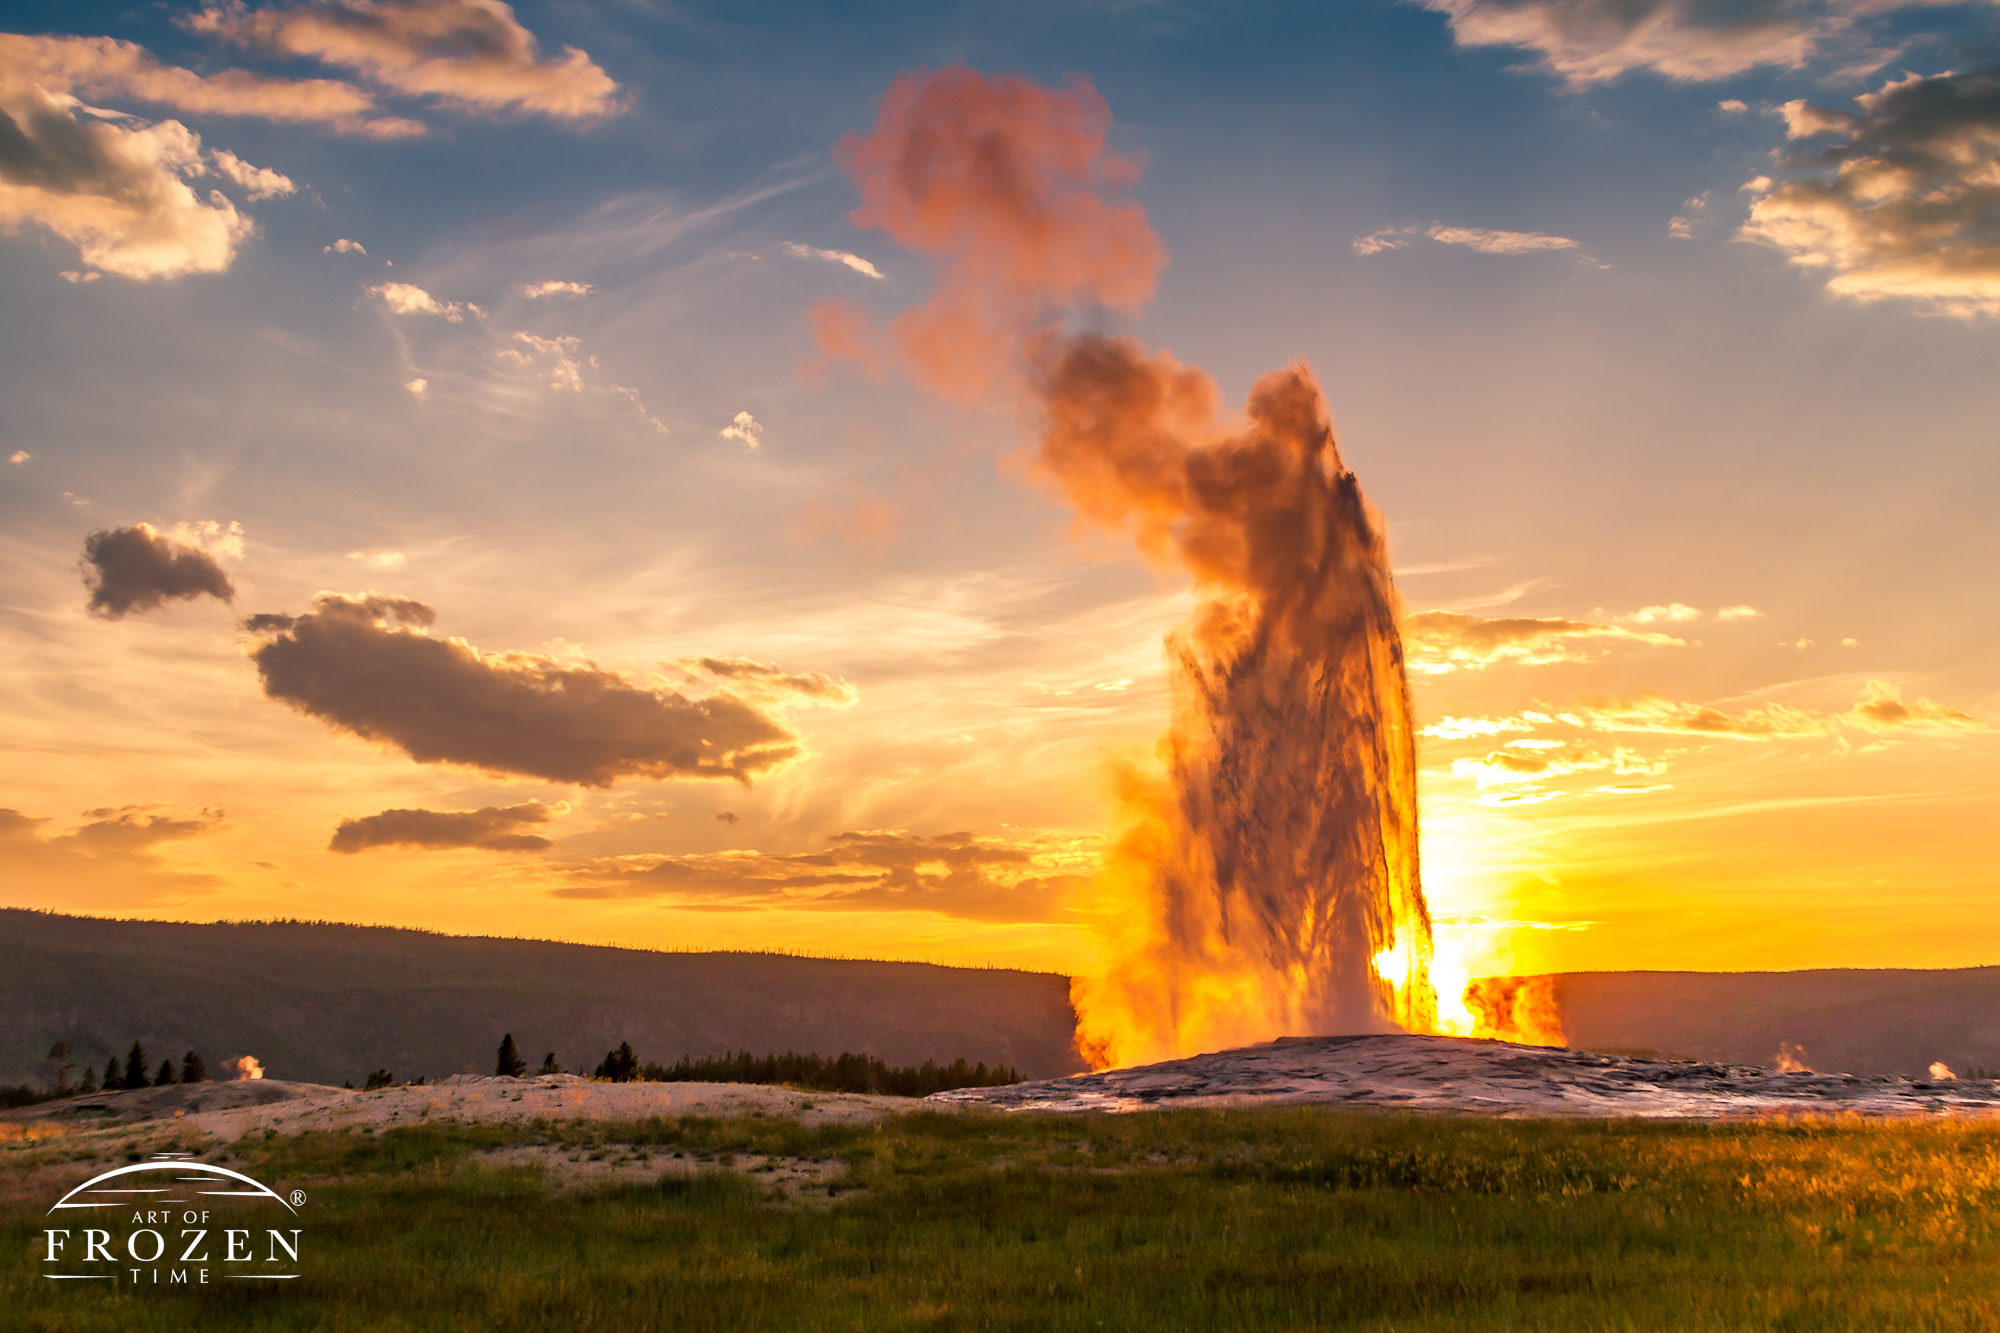 As Old Faithful geyser erupted the setting sun backlit the geothermal spray revealing a pareidolia in the form of a robed-figure with hands pressed into a praying position